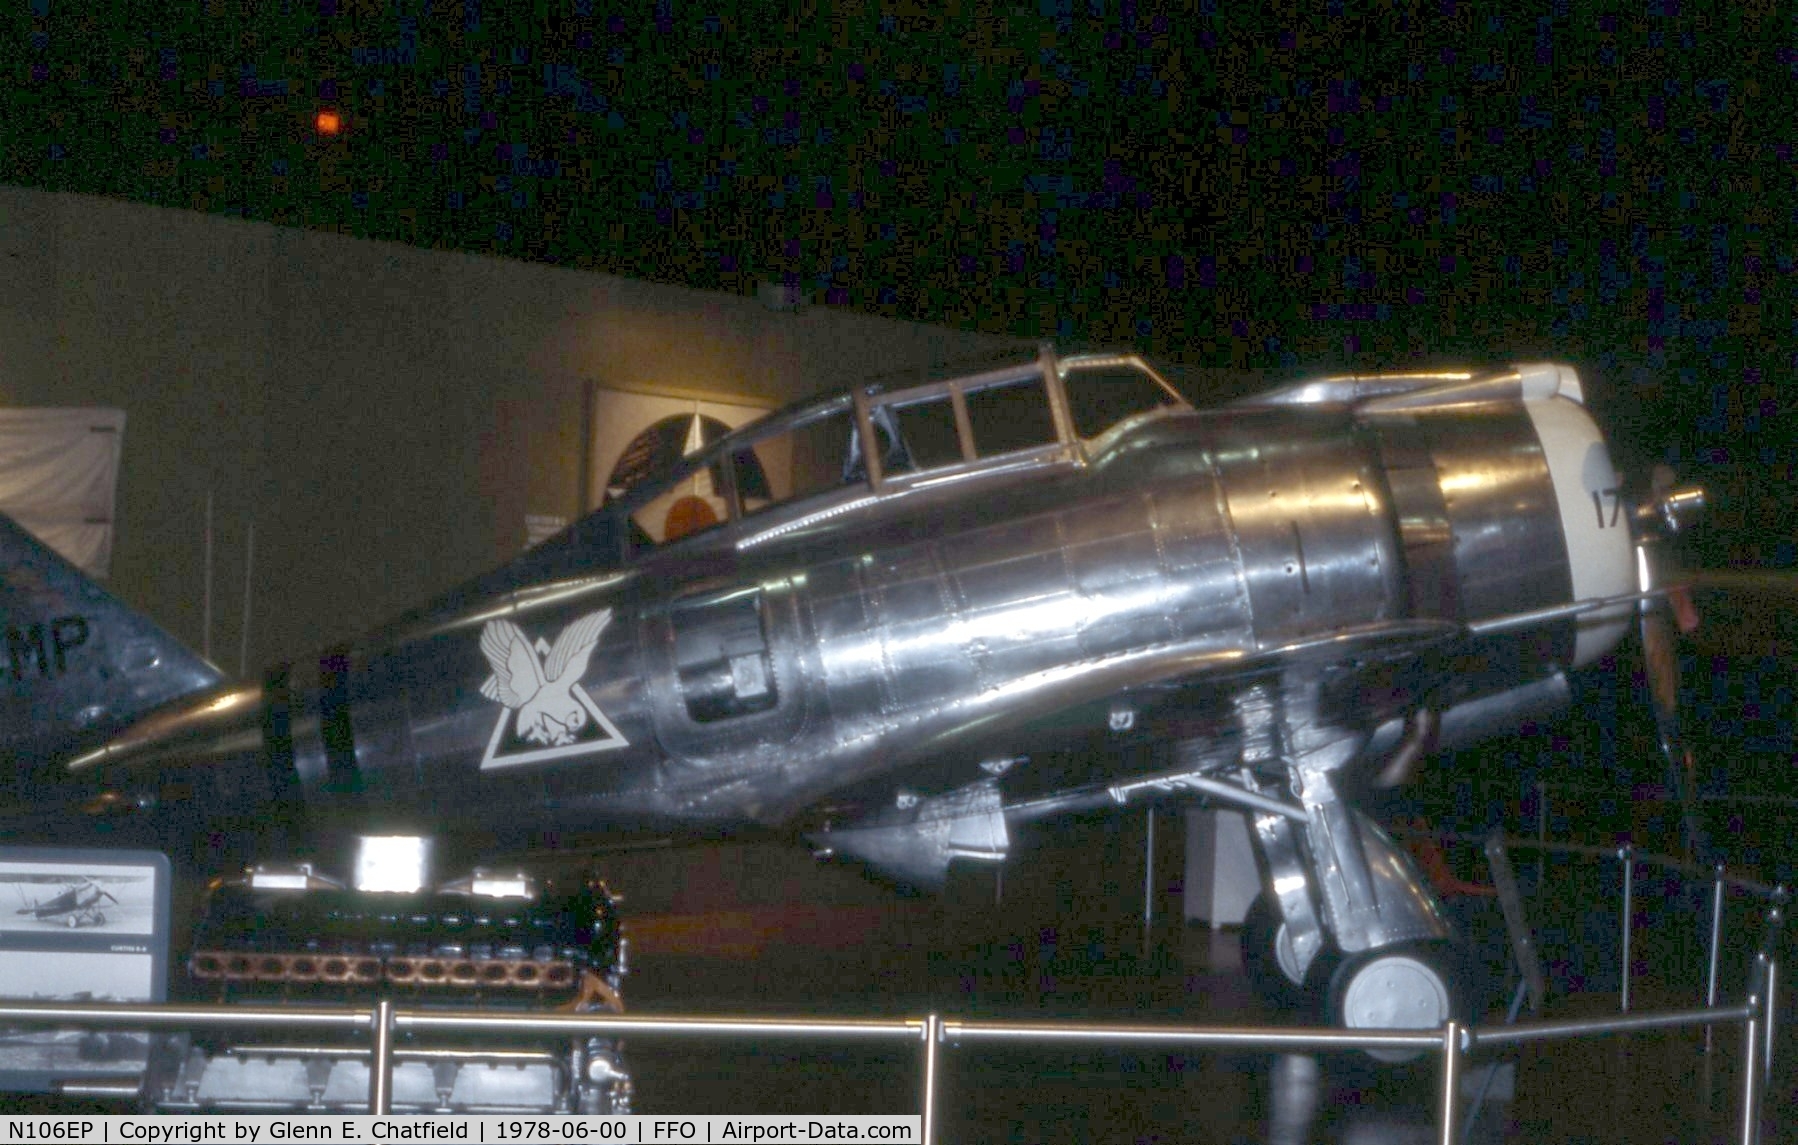 N106EP, Seversky P-35A C/N 282-11, At the National Museum of the U.S. Air Force.  Now with Kermit Weeks' Fantasy of Flight. P-35A 41-17449/EP-106. Ex Swiss AF 2126